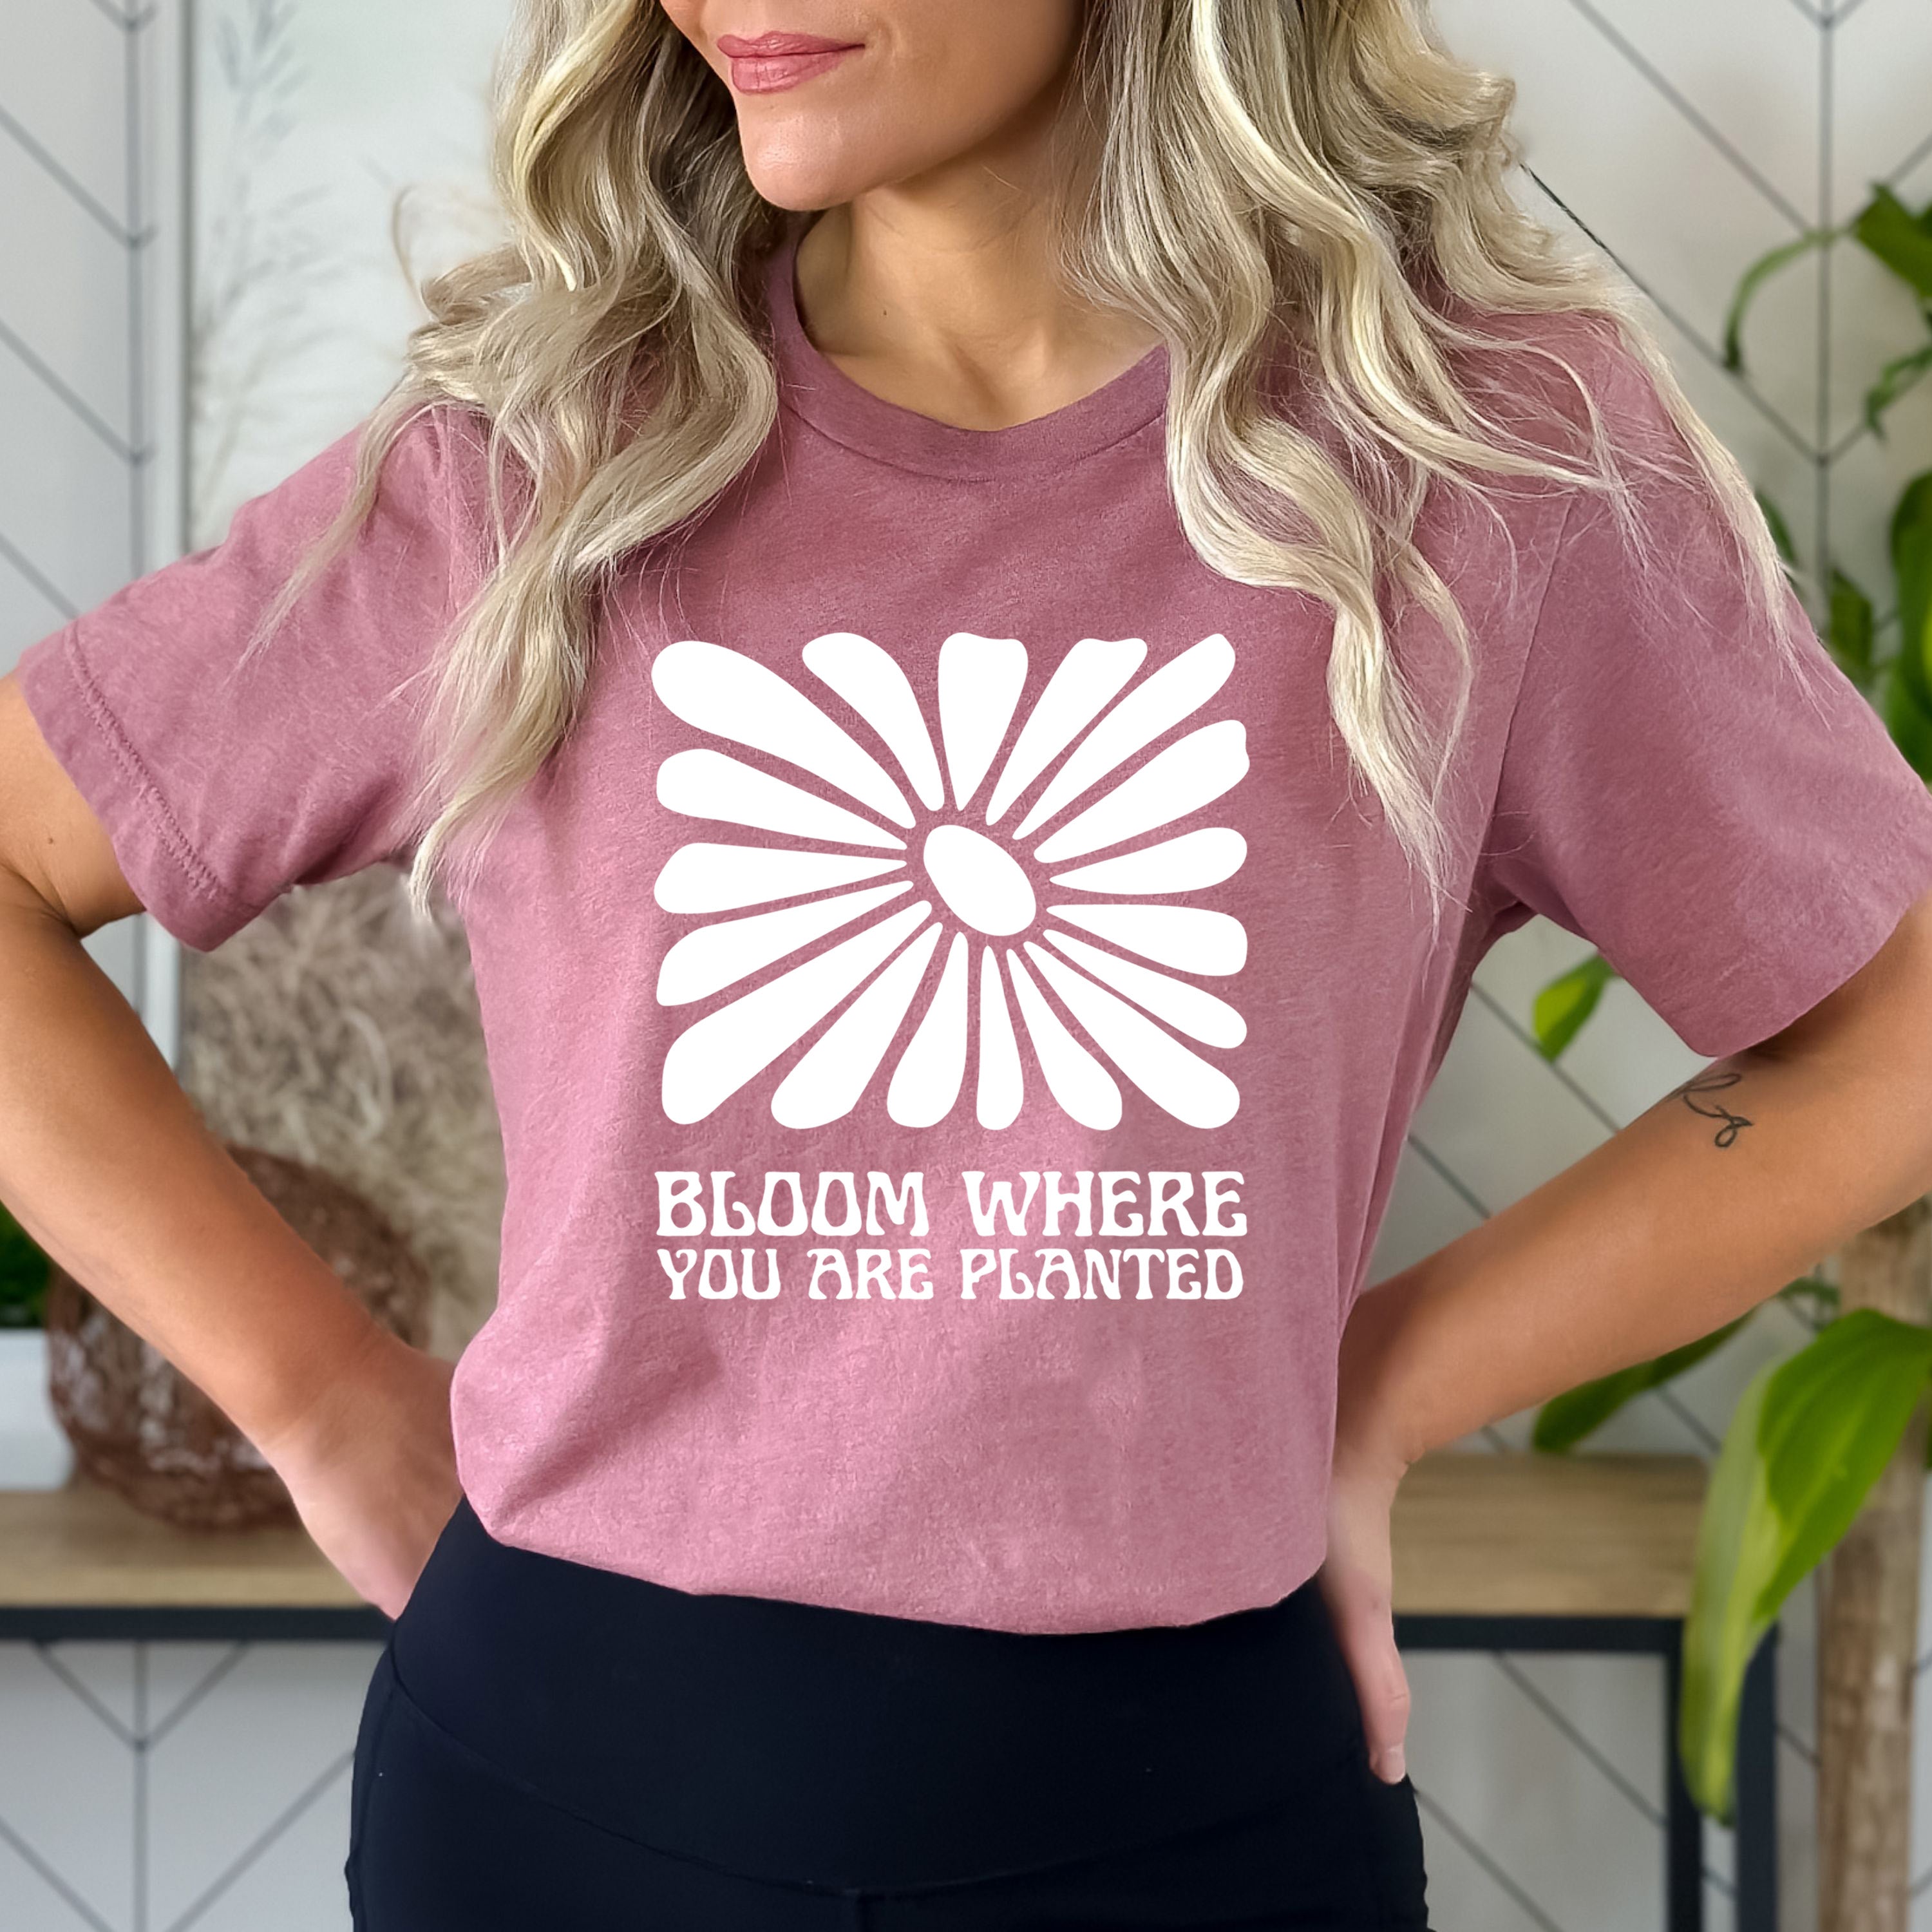 Bloom Where You Are Planted - Bella canvas